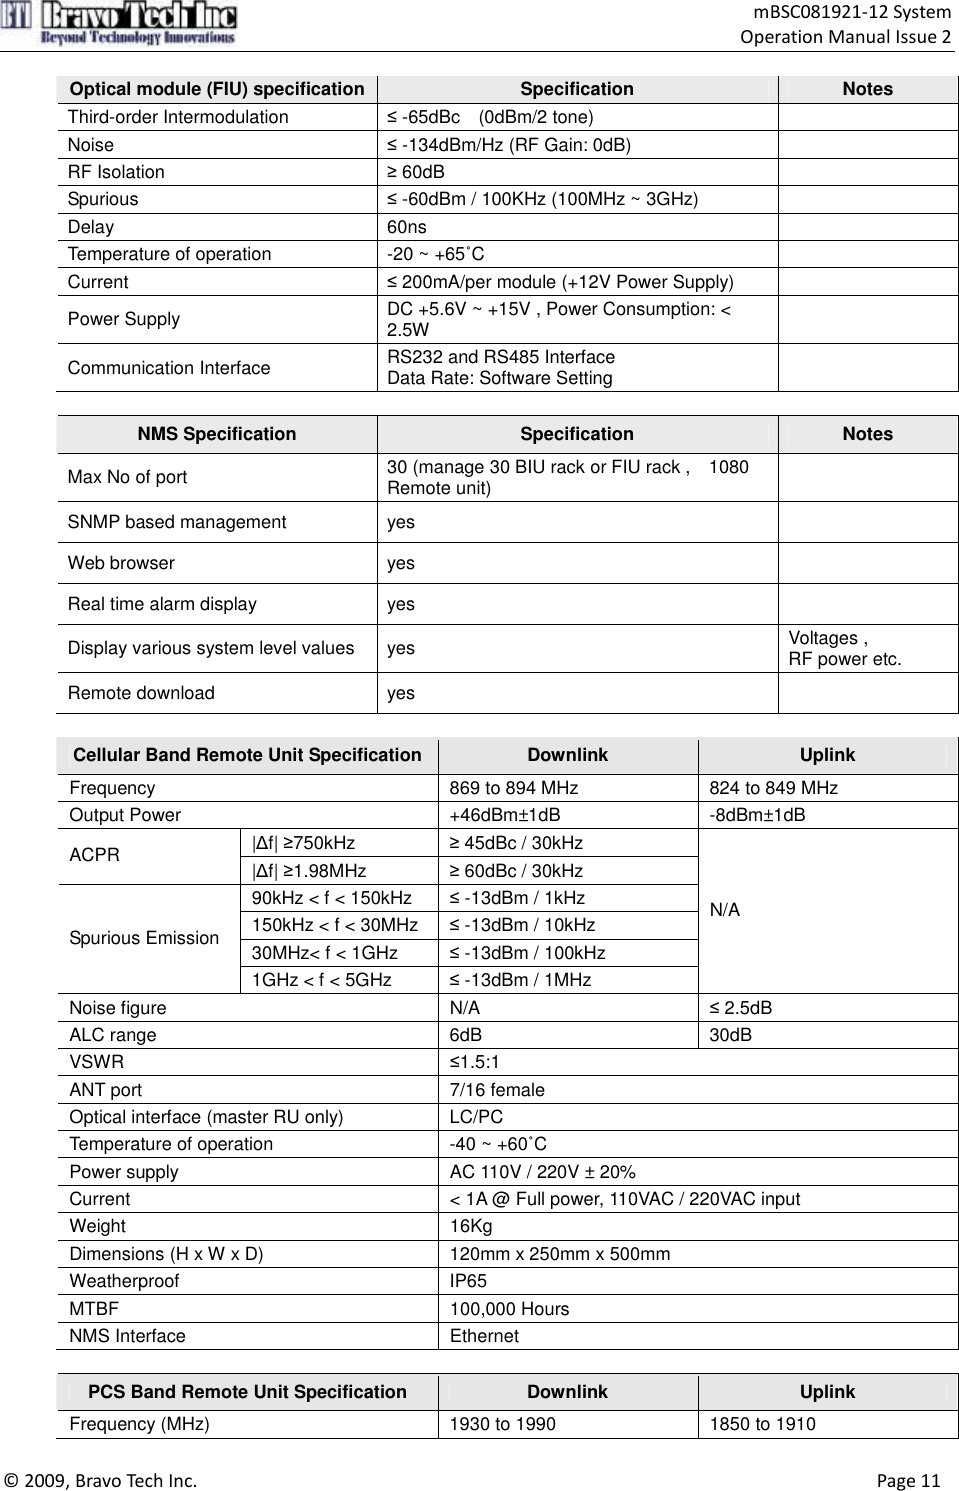                                    mBSC081921-12 System Operation Manual Issue 2  © 2009, Bravo Tech Inc.                                                                                                                                      Page 11  Optical module (FIU) specification Specification  Notes Third-order Intermodulation  ≤ -65dBc    (0dBm/2 tone)        Noise  ≤ -134dBm/Hz (RF Gain: 0dB)        RF Isolation  ≥ 60dB   Spurious  ≤ -60dBm / 100KHz (100MHz ~ 3GHz)       Delay  60ns      Temperature of operation  -20 ~ +65˚C   Current  ≤ 200mA/per module (+12V Power Supply)        Power Supply  DC +5.6V ~ +15V , Power Consumption: &lt; 2.5W   Communication Interface  RS232 and RS485 Interface Data Rate: Software Setting    NMS Specification  Specification  Notes Max No of port  30 (manage 30 BIU rack or FIU rack ,    1080 Remote unit)       SNMP based management  yes   Web browser    yes   Real time alarm display  yes   Display various system level values  yes  Voltages , RF power etc. Remote download  yes    Cellular Band Remote Unit Specification Downlink  Uplink Frequency  869 to 894 MHz  824 to 849 MHz Output Power  +46dBm±1dB  -8dBm±1dB   |∆f| ≥750kHz  ≥ 45dBc / 30kHz ACPR  |∆f| ≥1.98MHz  ≥ 60dBc / 30kHz 90kHz &lt; f &lt; 150kHz  ≤ -13dBm / 1kHz 150kHz &lt; f &lt; 30MHz  ≤ -13dBm / 10kHz 30MHz&lt; f &lt; 1GHz  ≤ -13dBm / 100kHz Spurious Emission 1GHz &lt; f &lt; 5GHz  ≤ -13dBm / 1MHz N/A Noise figure  N/A  ≤ 2.5dB ALC range 6dB                                                             30dB VSWR  ≤1.5:1 ANT port  7/16 female Optical interface (master RU only)      LC/PC   Temperature of operation  -40 ~ +60˚C Power supply  AC 110V / 220V ± 20% Current  &lt; 1A @ Full power, 110VAC / 220VAC input Weight  16Kg Dimensions (H x W x D)      120mm x 250mm x 500mm Weatherproof  IP65 MTBF  100,000 Hours NMS Interface  Ethernet  PCS Band Remote Unit Specification  Downlink  Uplink Frequency (MHz)      1930 to 1990  1850 to 1910 